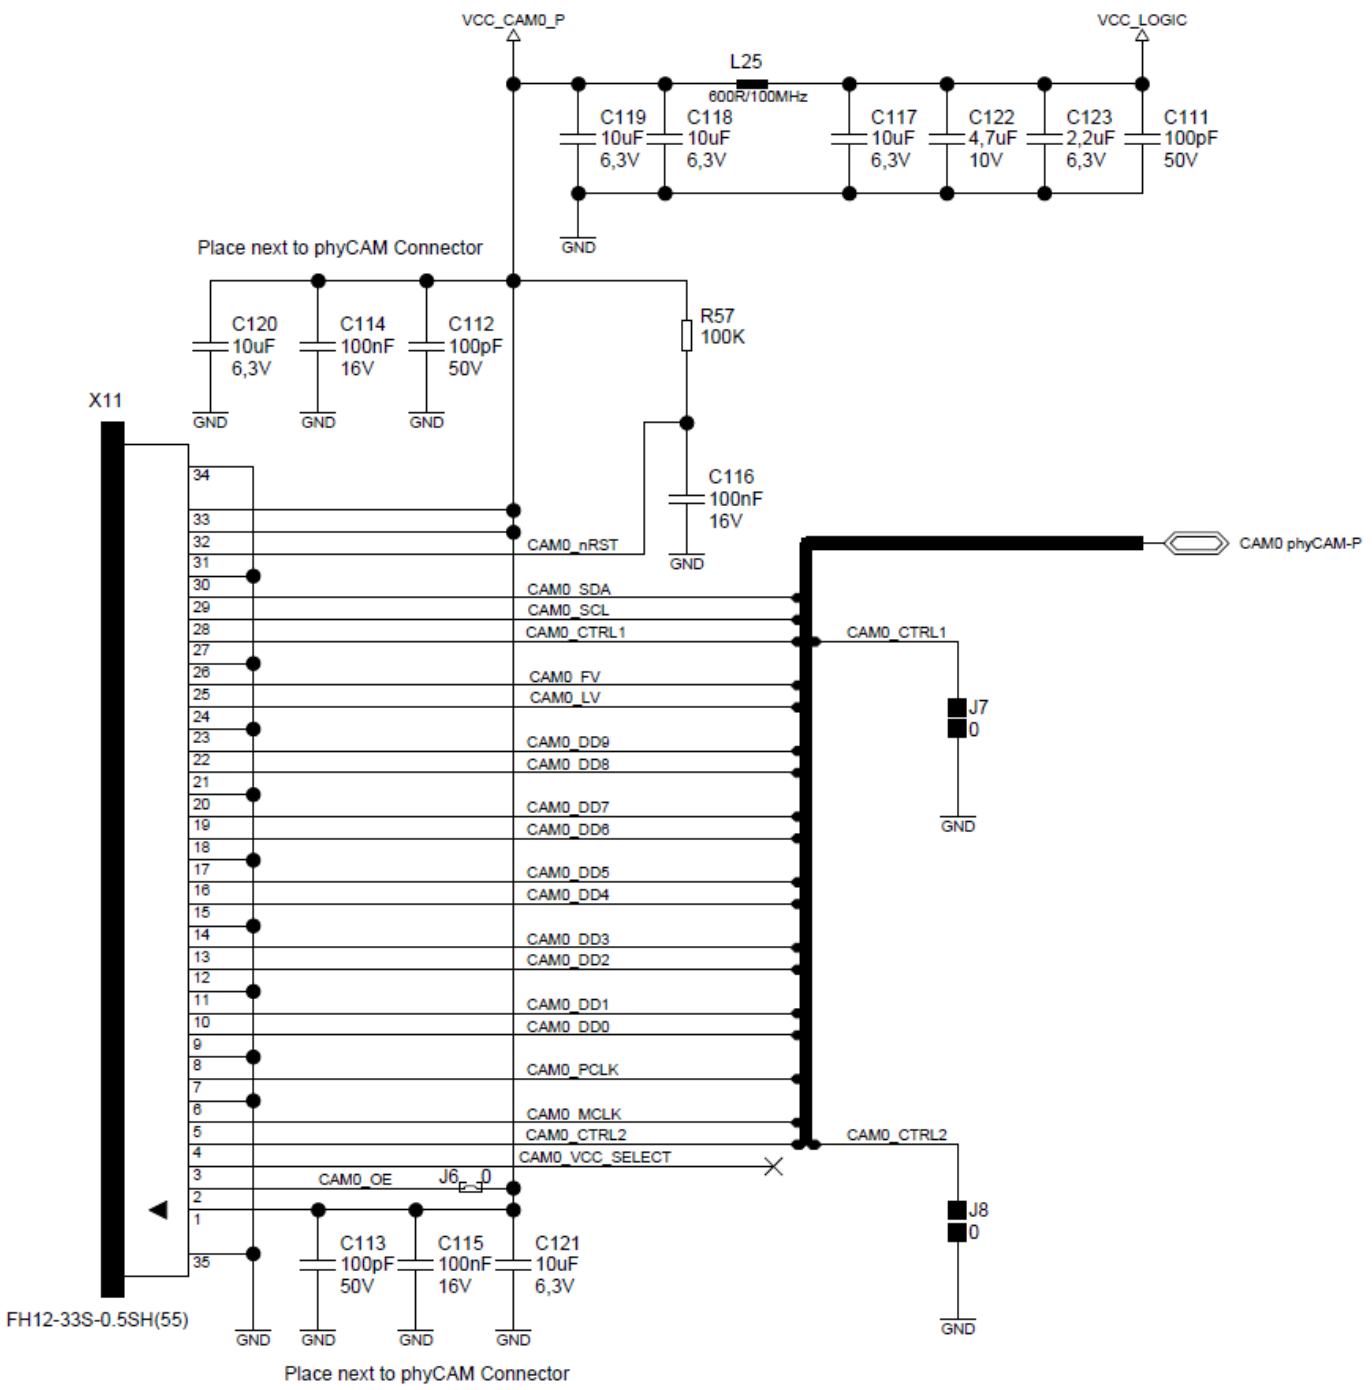 phyCAM-P Reference Circuit Diagram for Low BOM Costs